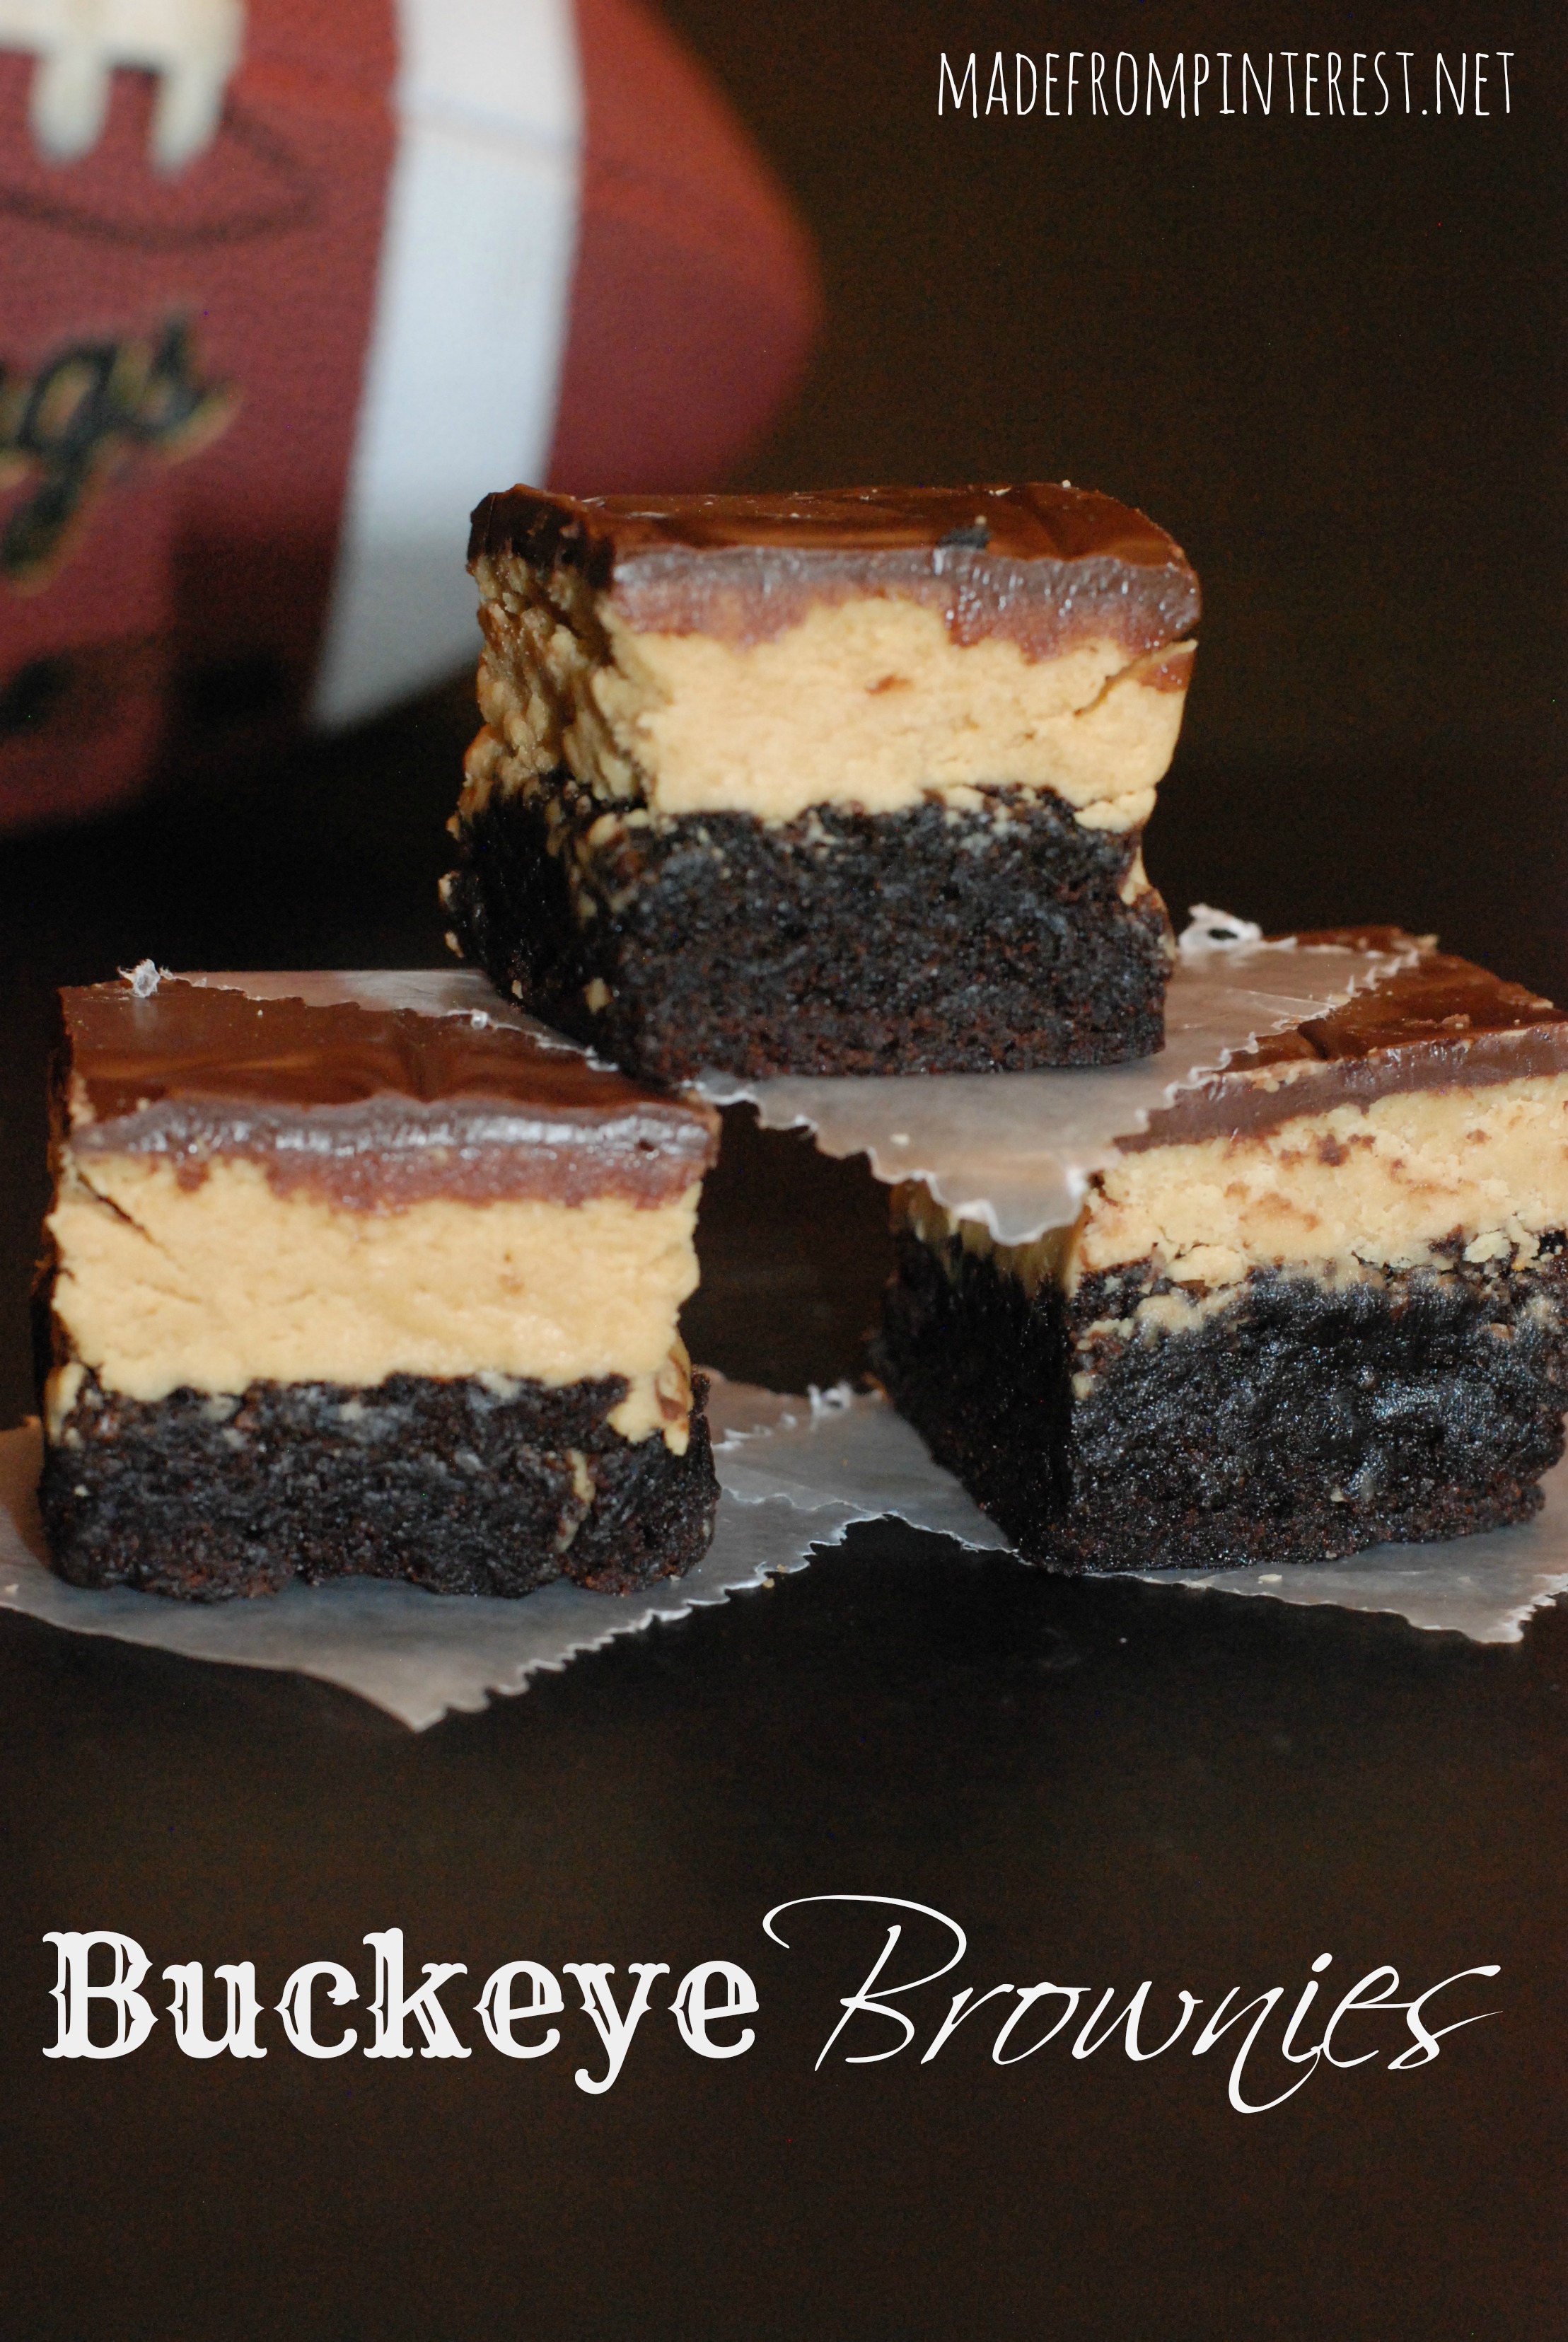 Perfect for football games! Buckeye Brownies. madefrompinterest.net